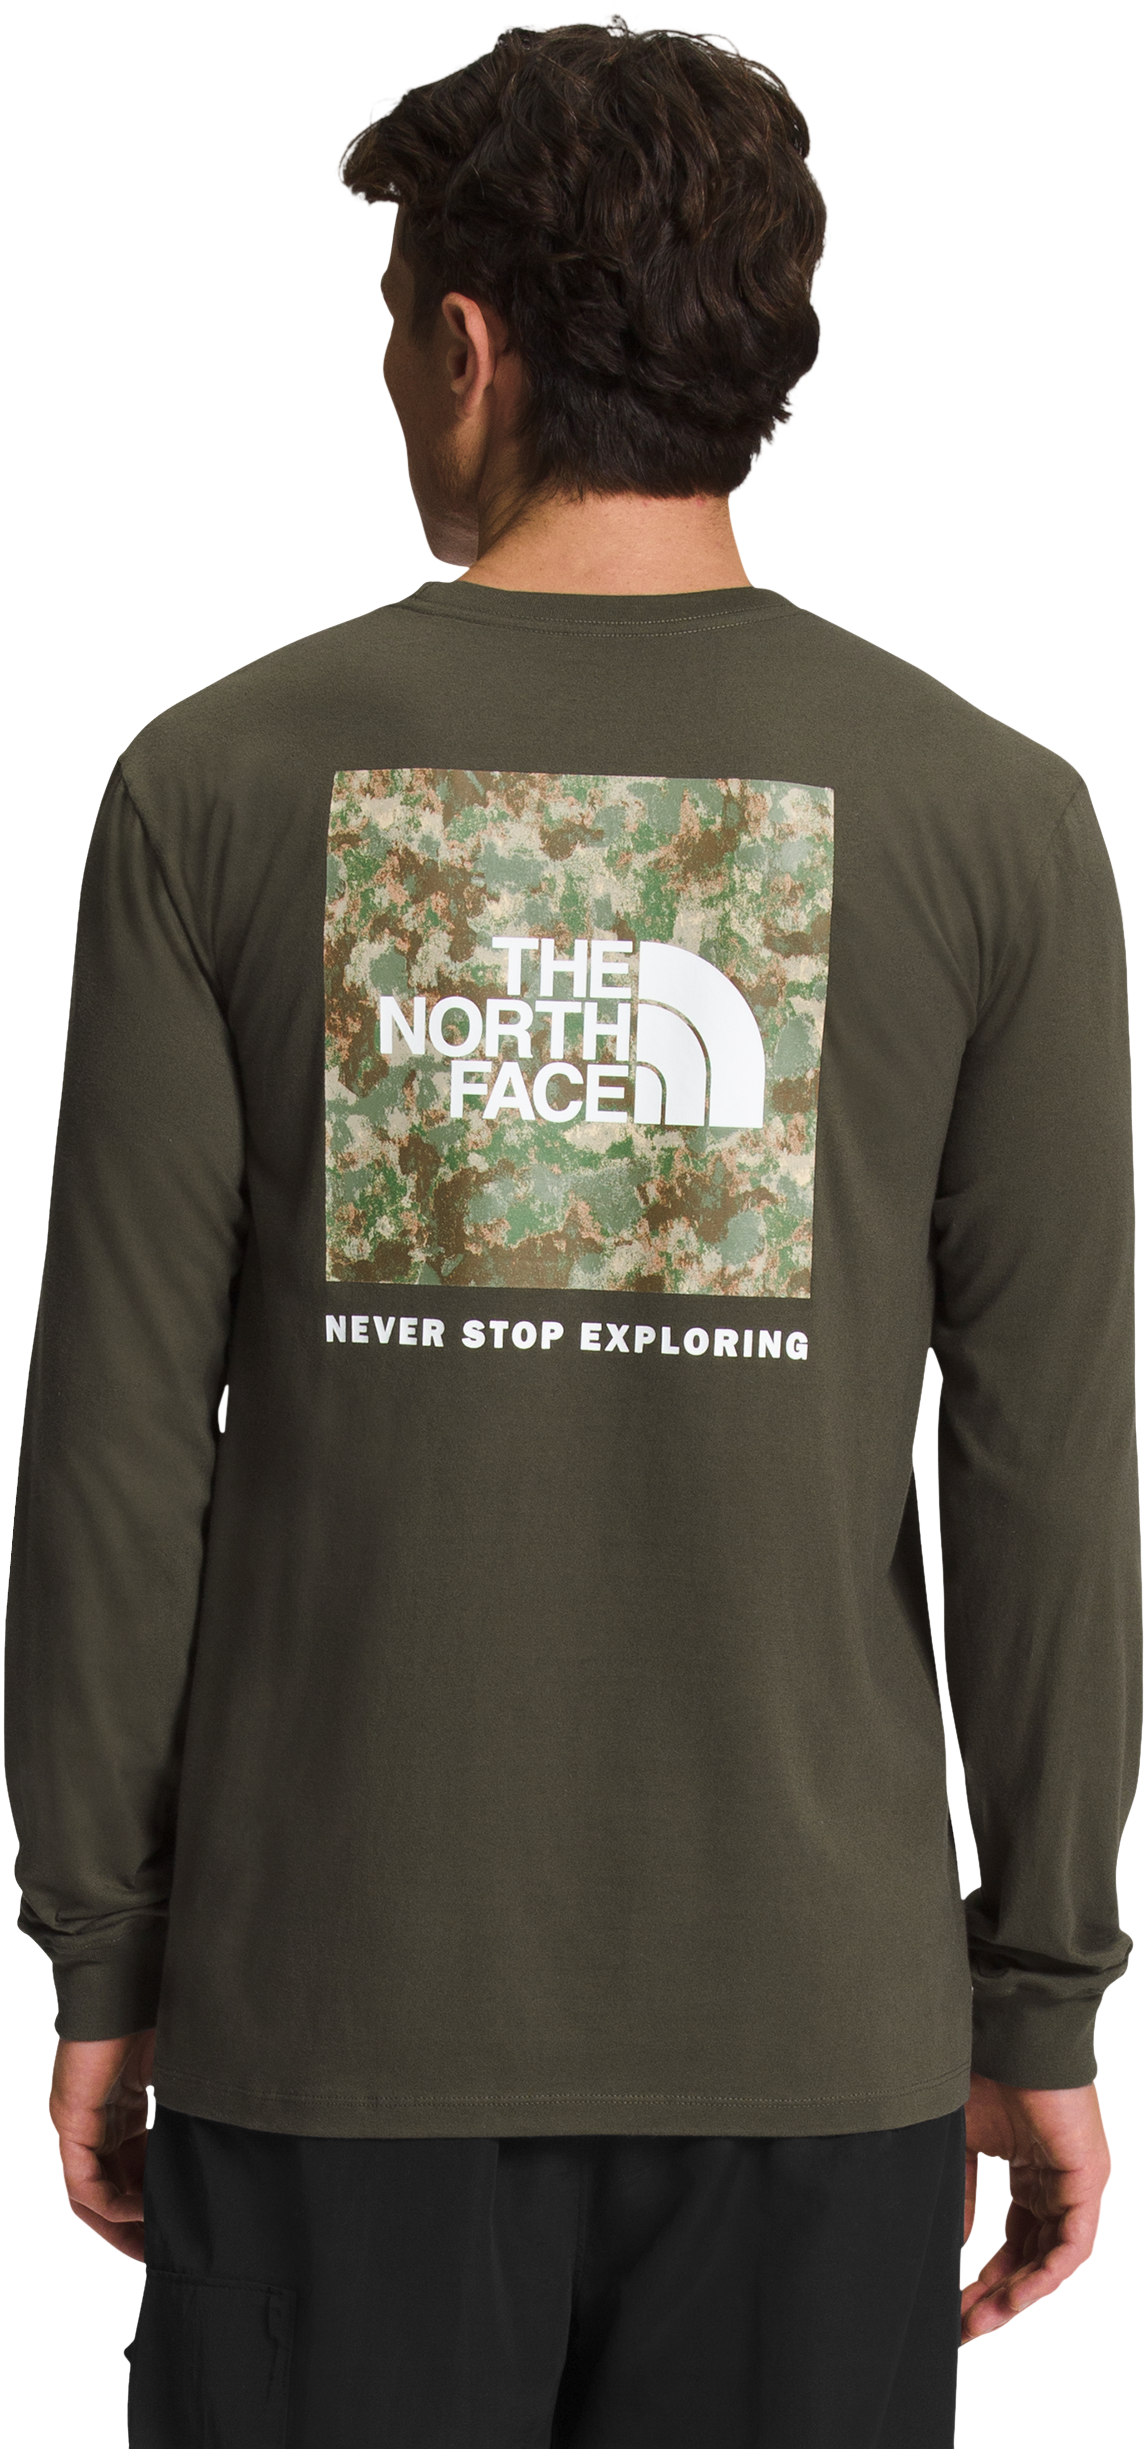 The North Face Box NSE Long-Sleeve Shirt for Men - New Taupe Green/Military Olive - XL